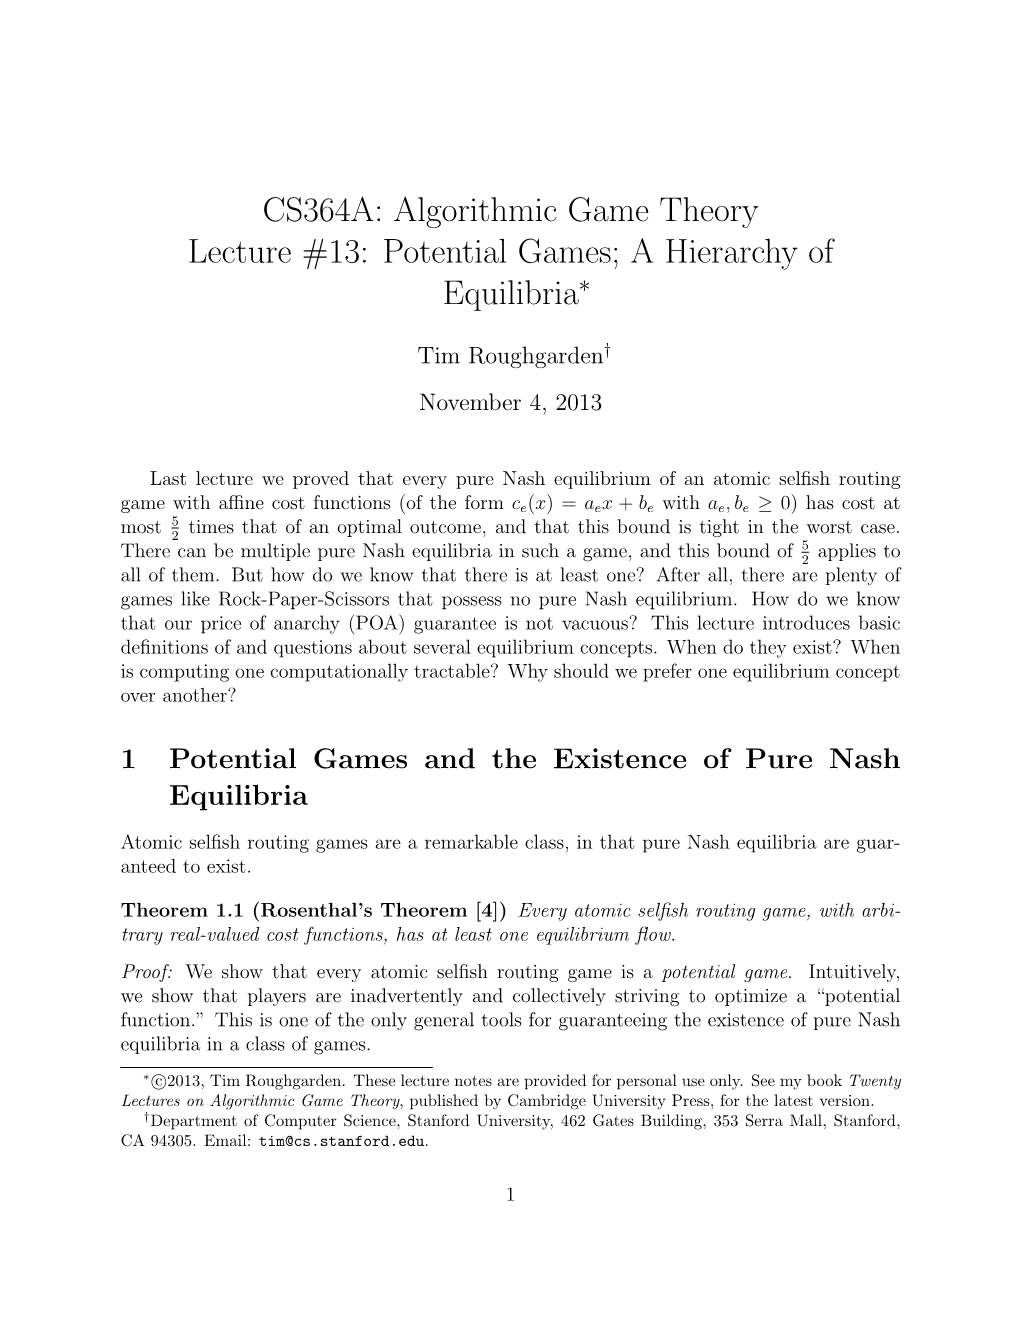 Algorithmic Game Theory Lecture #13: Potential Games; a Hierarchy of Equilibria∗